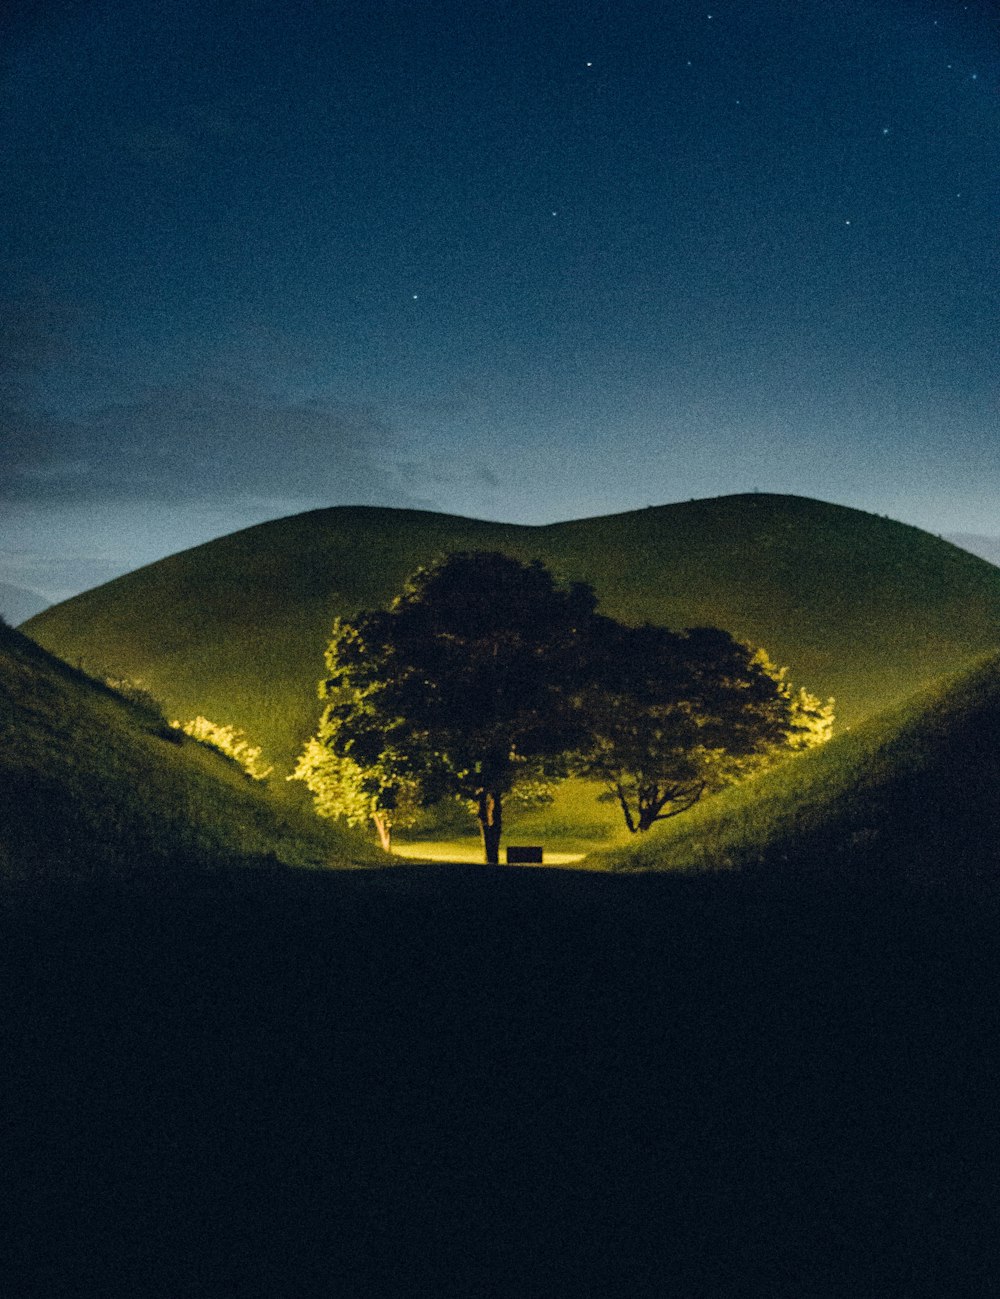 green trees on hill under blue sky during night time